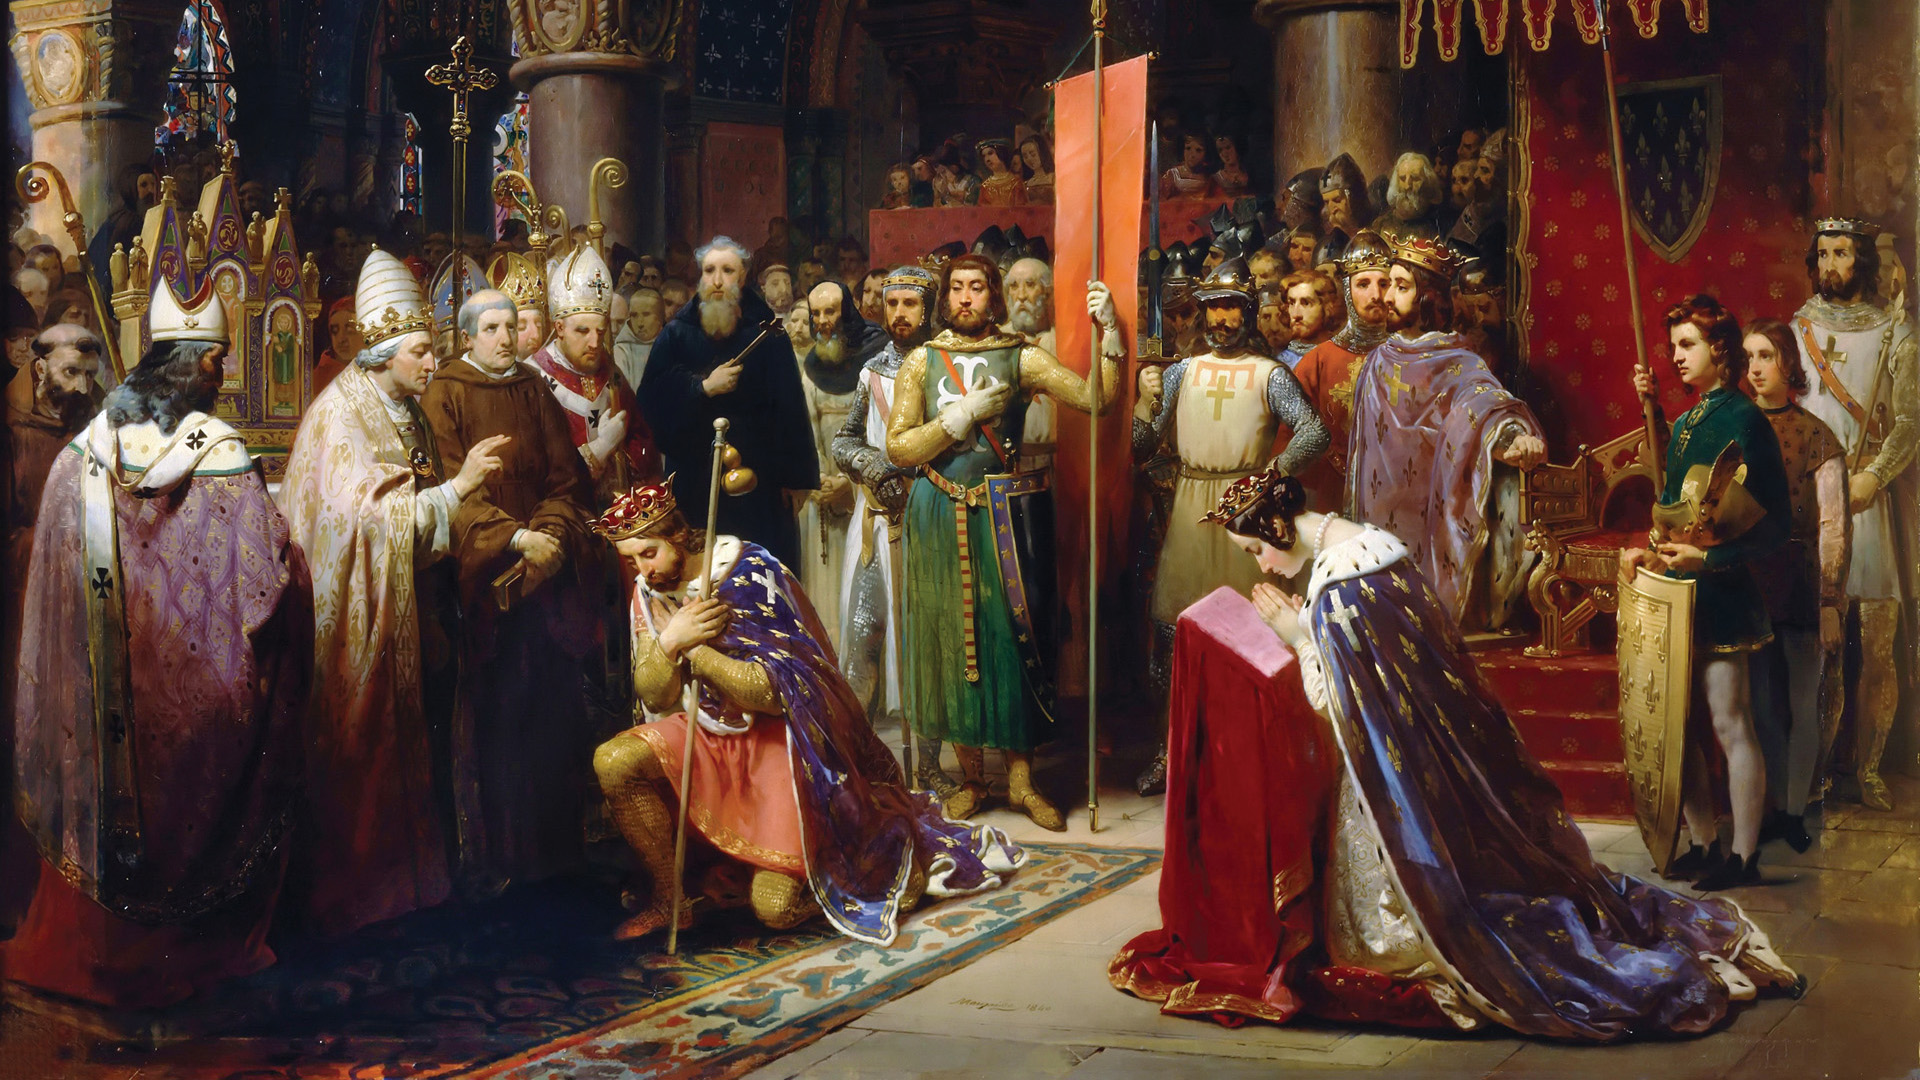 Pope Eugenius III presents his pilgrim staff to King Louis VII at the Church of St. Denis. A high-ranking knight holds the Oriflamme, which was the battle standard of French kings.